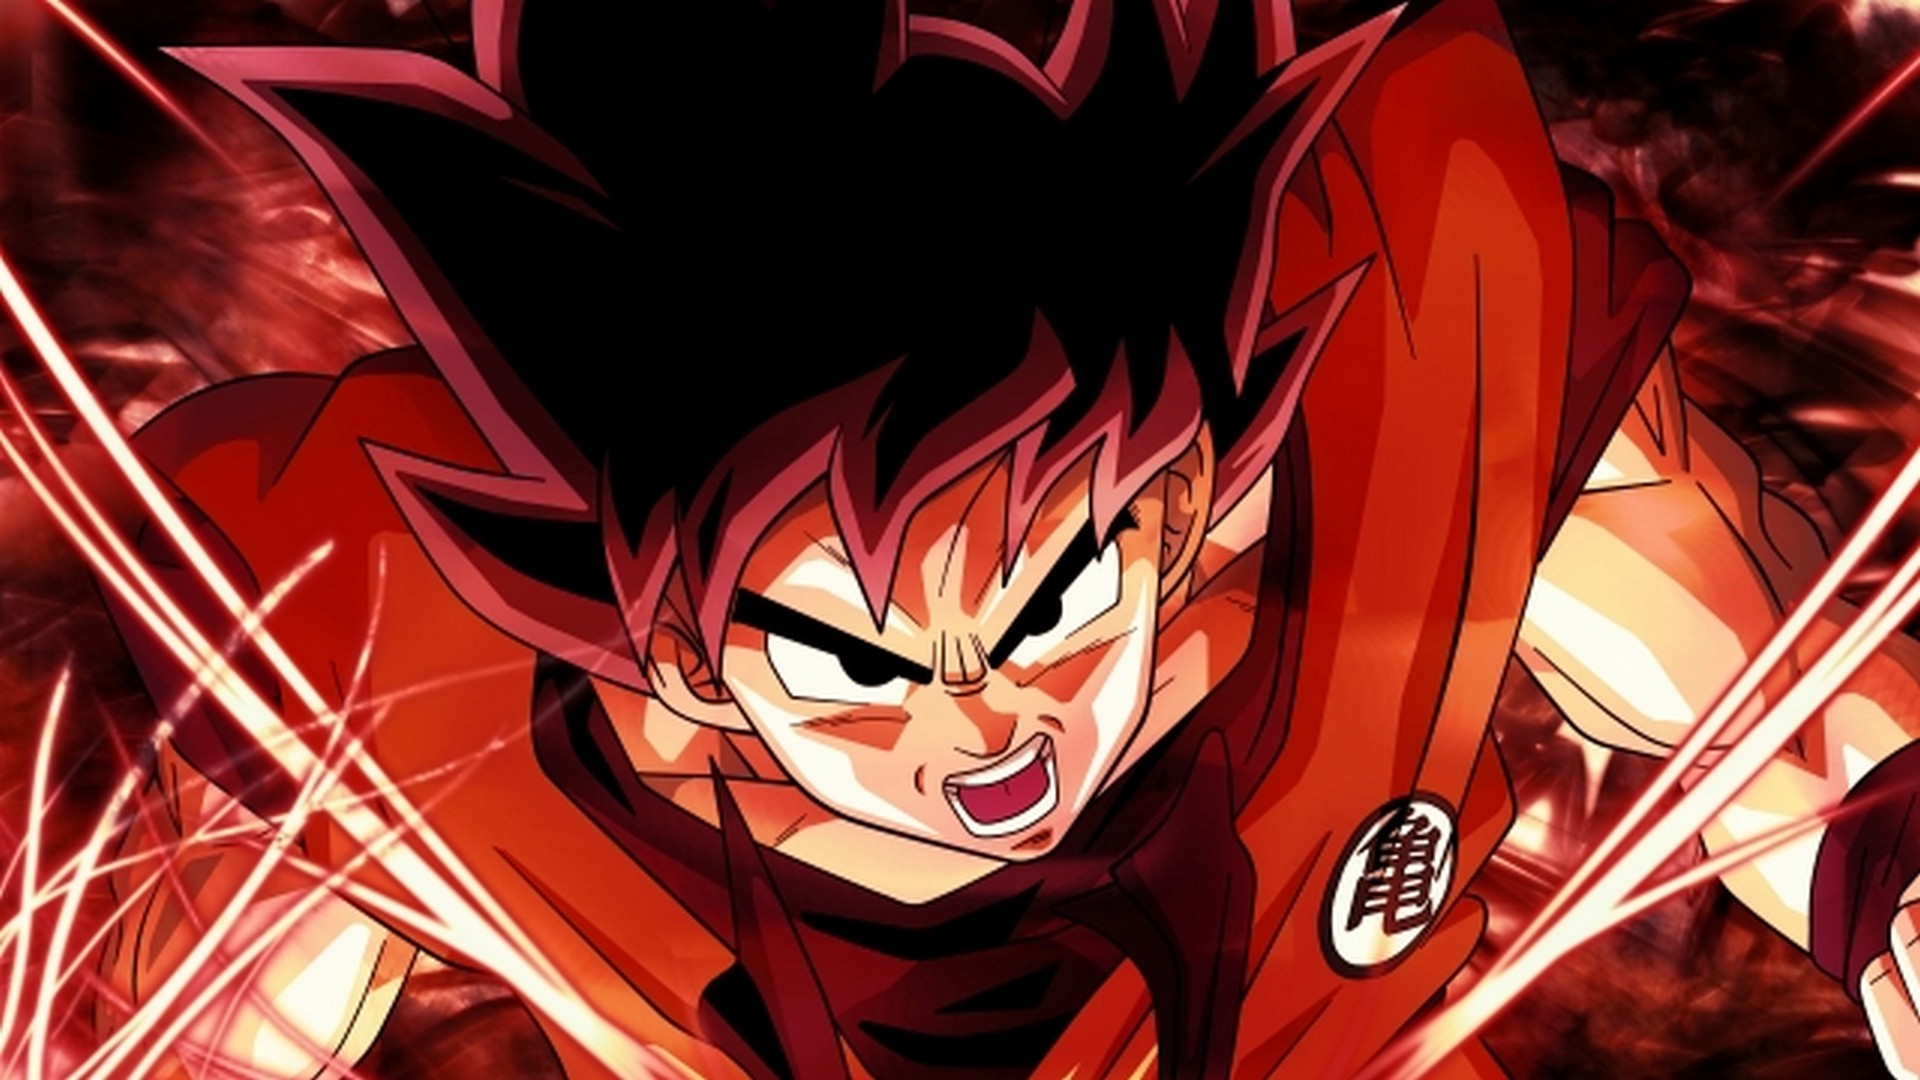 Wallpaper Goku Super Saiyan God HD With Resolution 1920X1080 pixel. You can make this wallpaper for your Desktop Computer Backgrounds, Mac Wallpapers, Android Lock screen or iPhone Screensavers